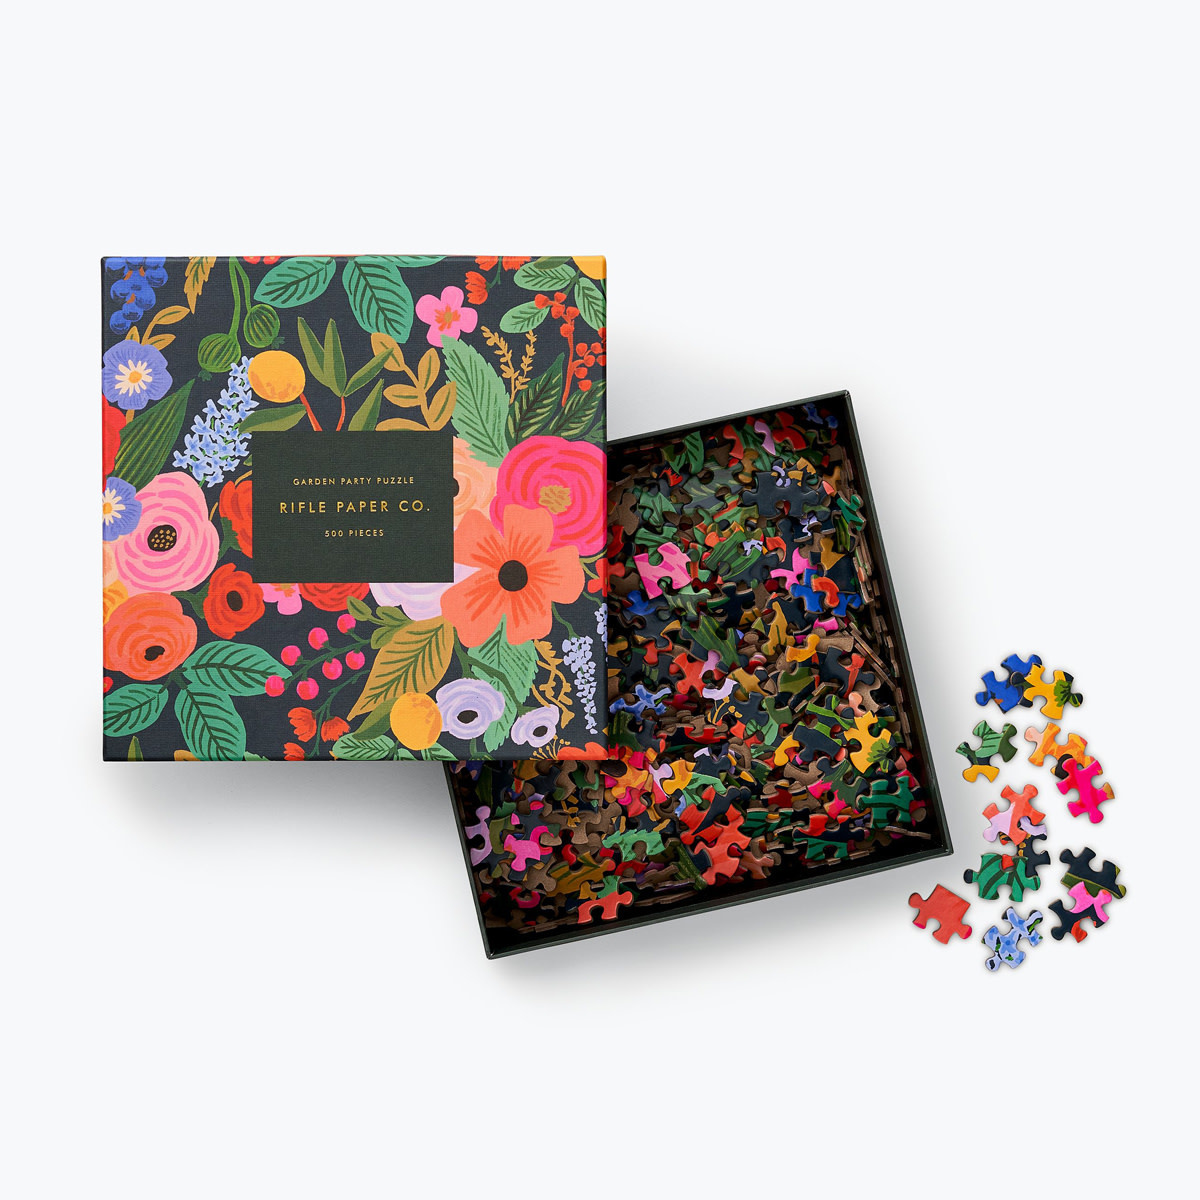 Rifle Paper Co. Jigsaw Puzzle - 500 Pieces - Garden Party